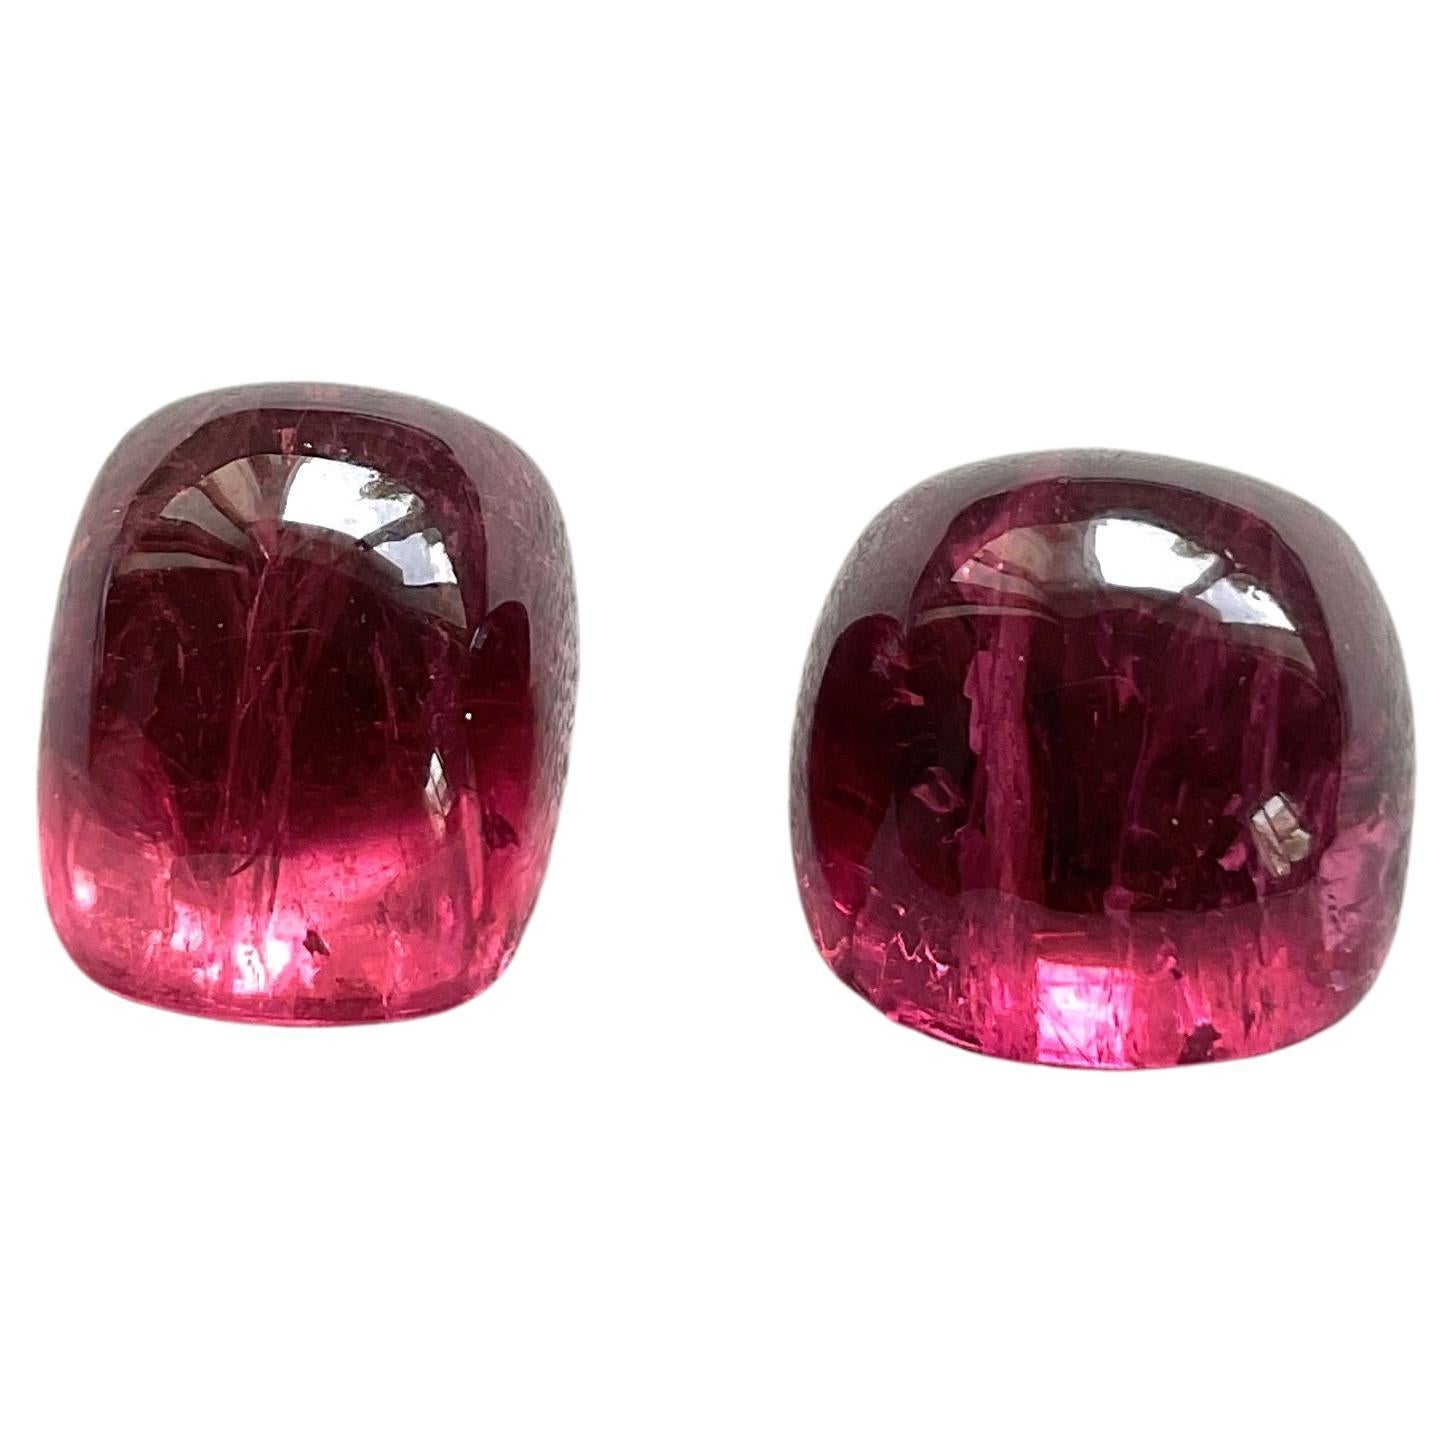 48.78 Carats Top Quality Rubellite Tourmaline Cushion 2 Pieces Natural Gemstone For Sale